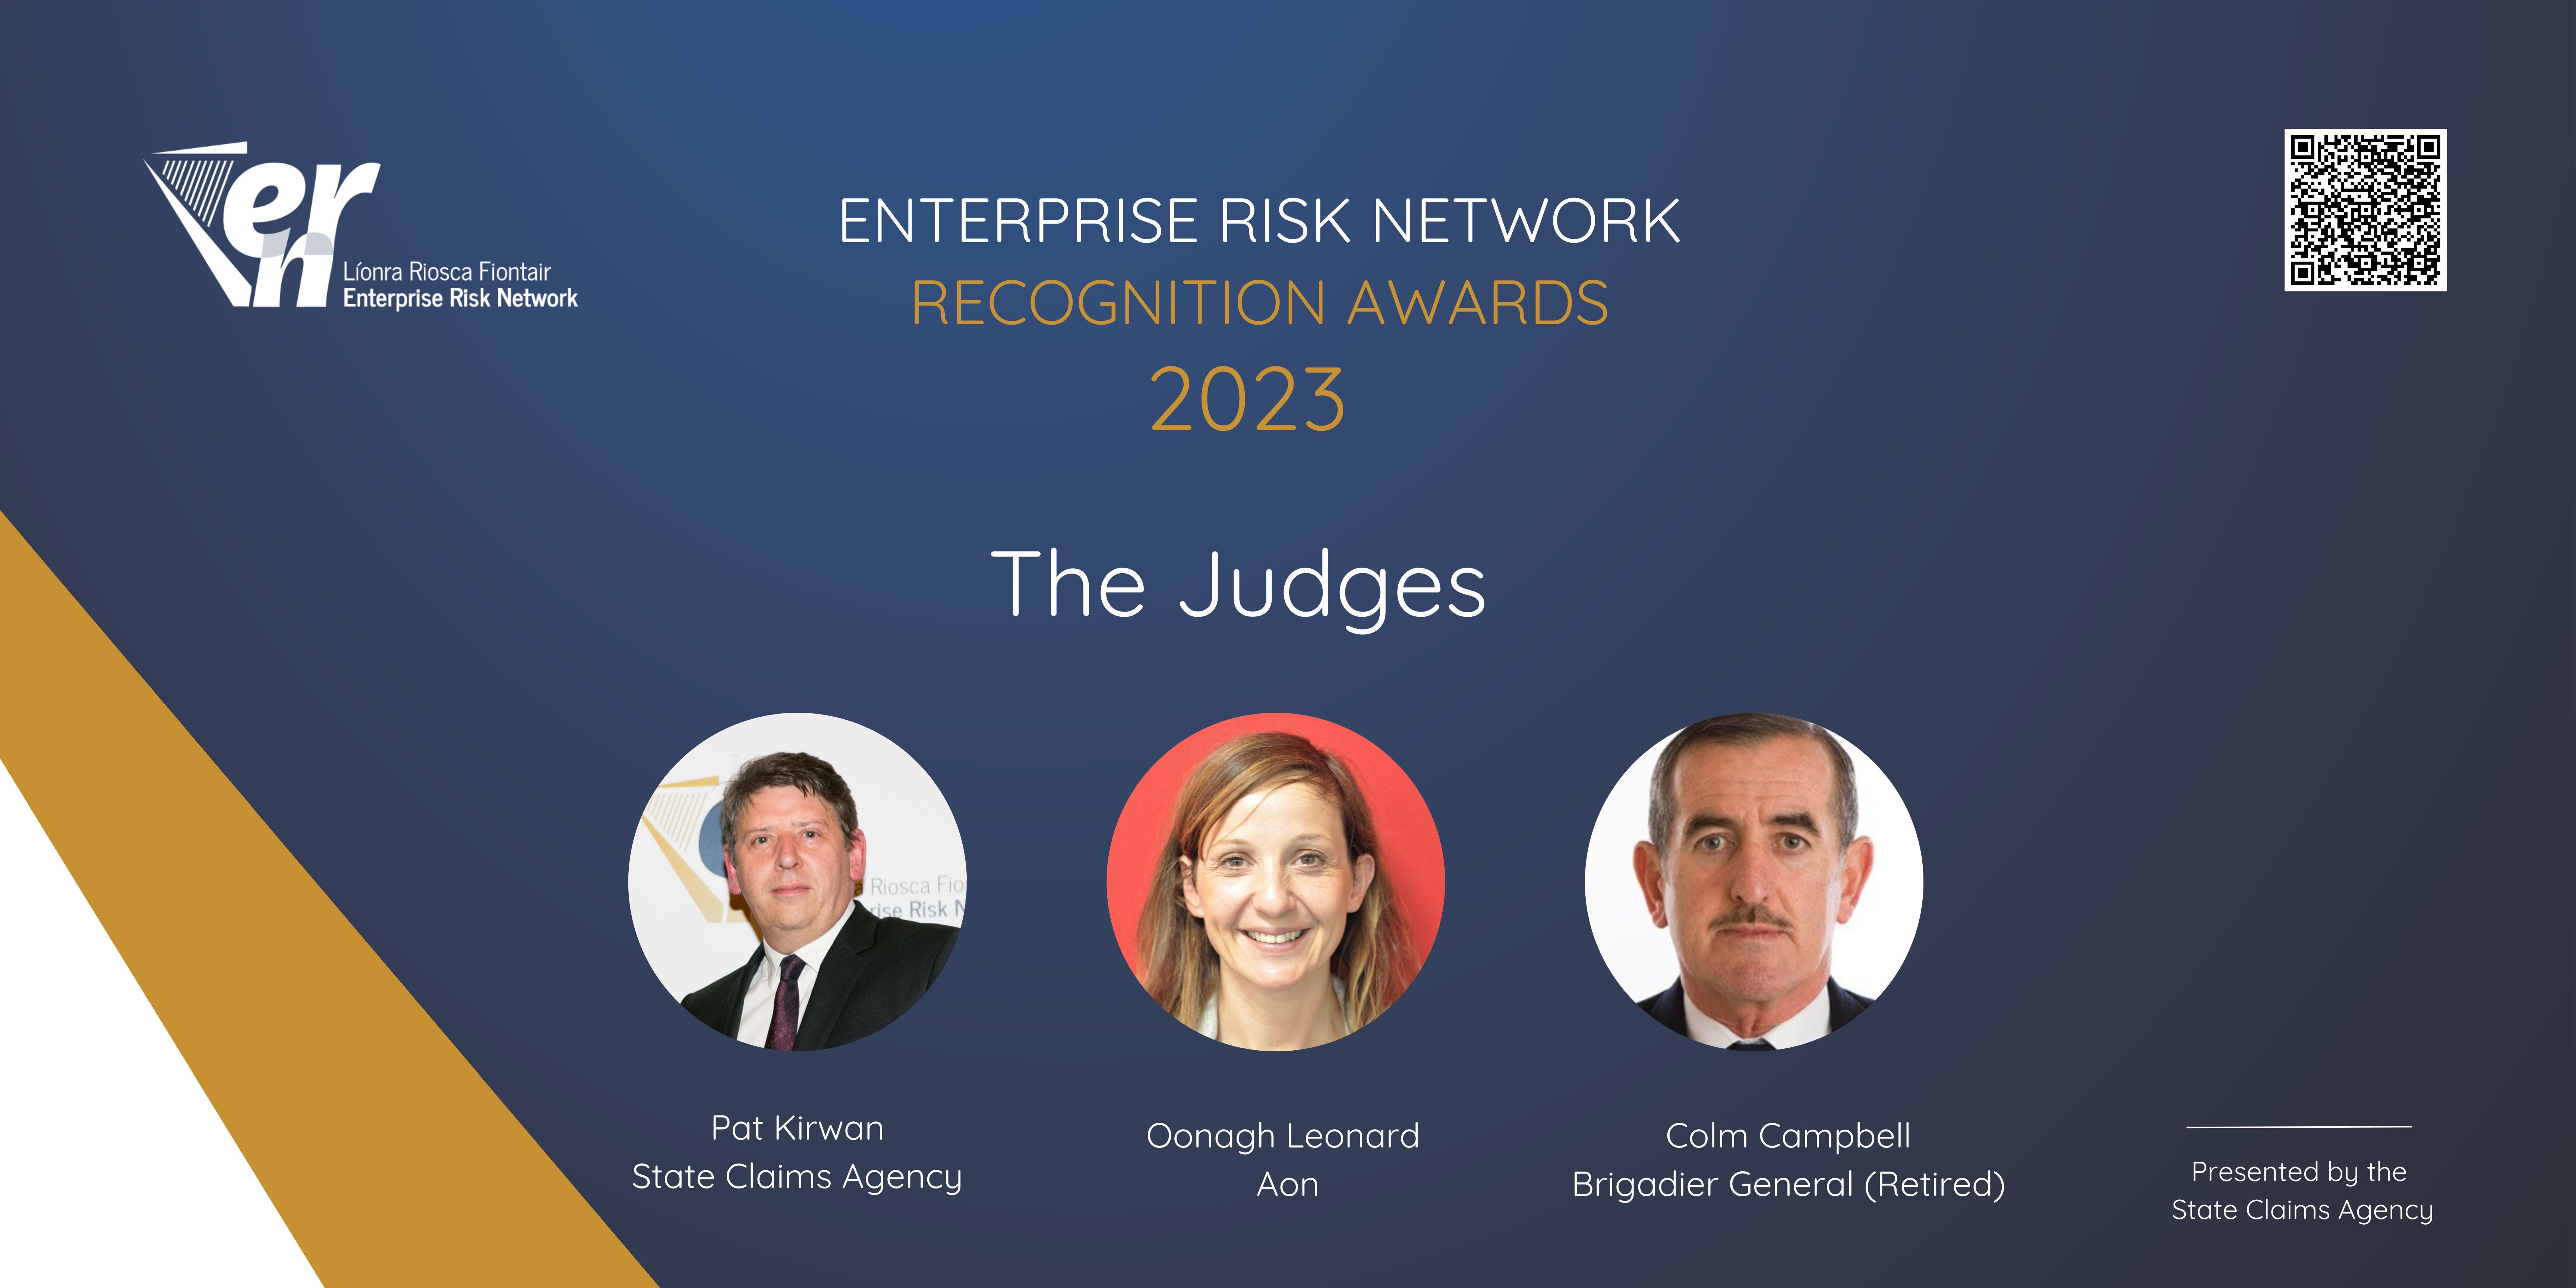 Photos of the three judges for the 2023 awards